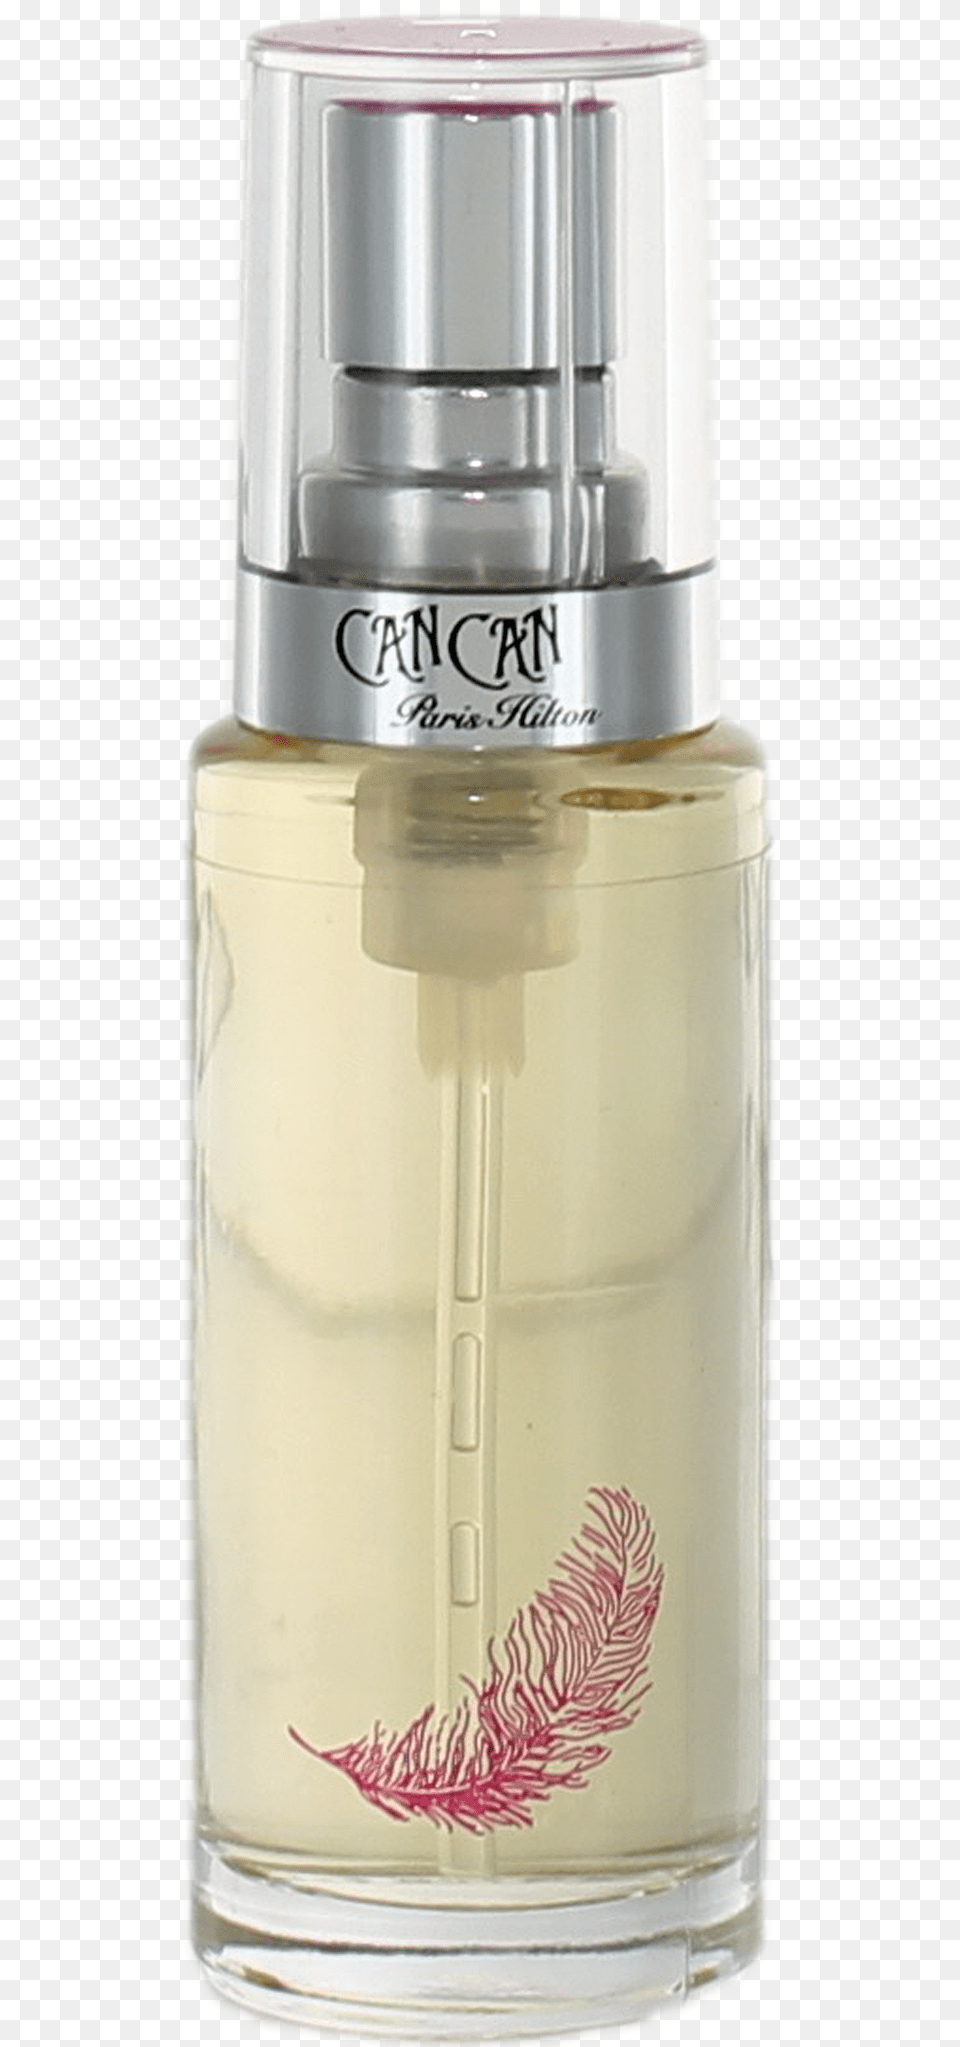 Can Can By Paris Hilton For Women Miniature Edp Spray, Bottle, Cosmetics, Perfume Png Image